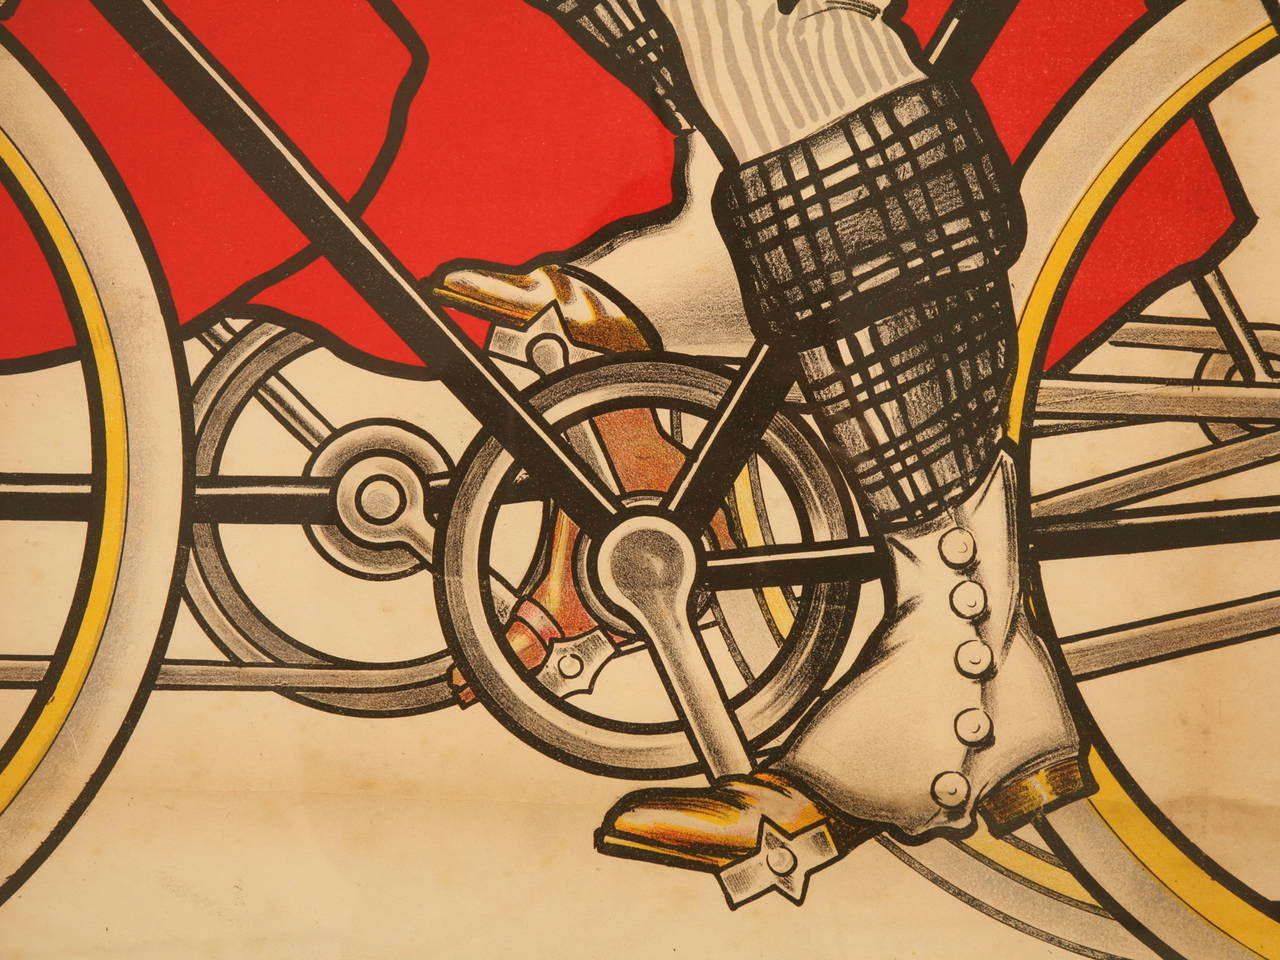 Paper Bicycle Poster from Dijon, France circa 1905 by Rene Vincent, 1stdibs New York